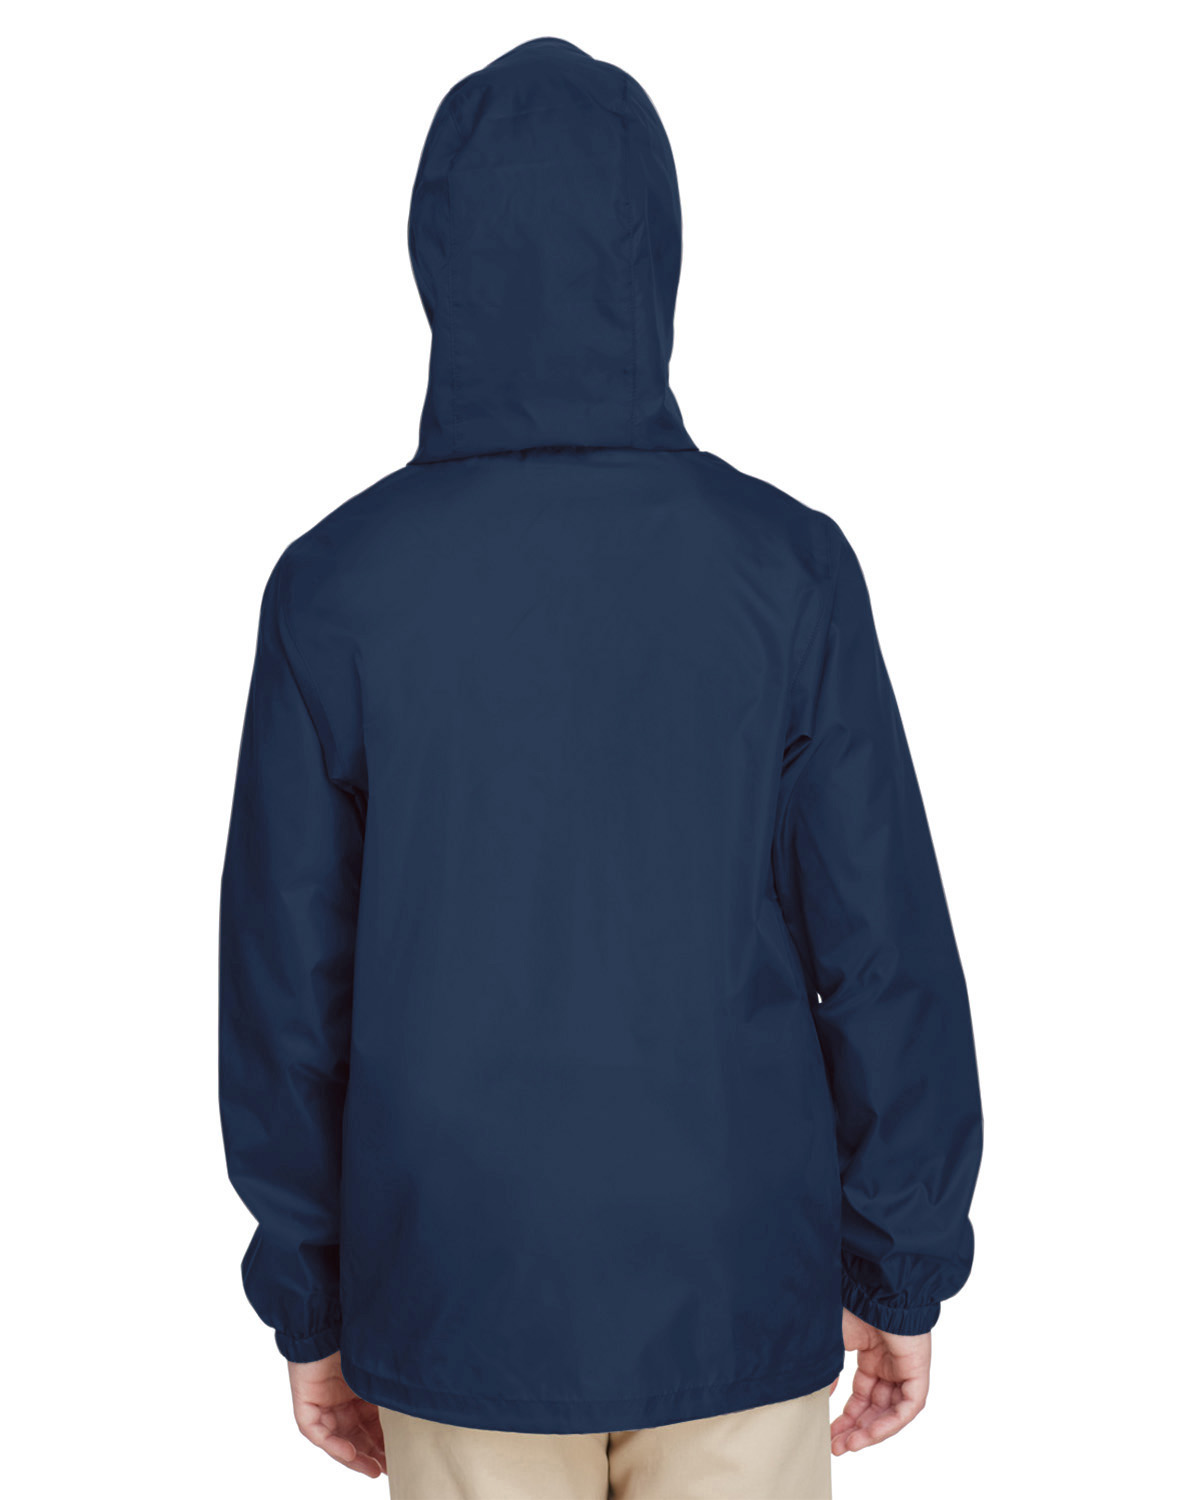 Team 365, The Youth Zone Protect Lightweight Jacket - SPORT DARK NAVY - L - image 2 of 2